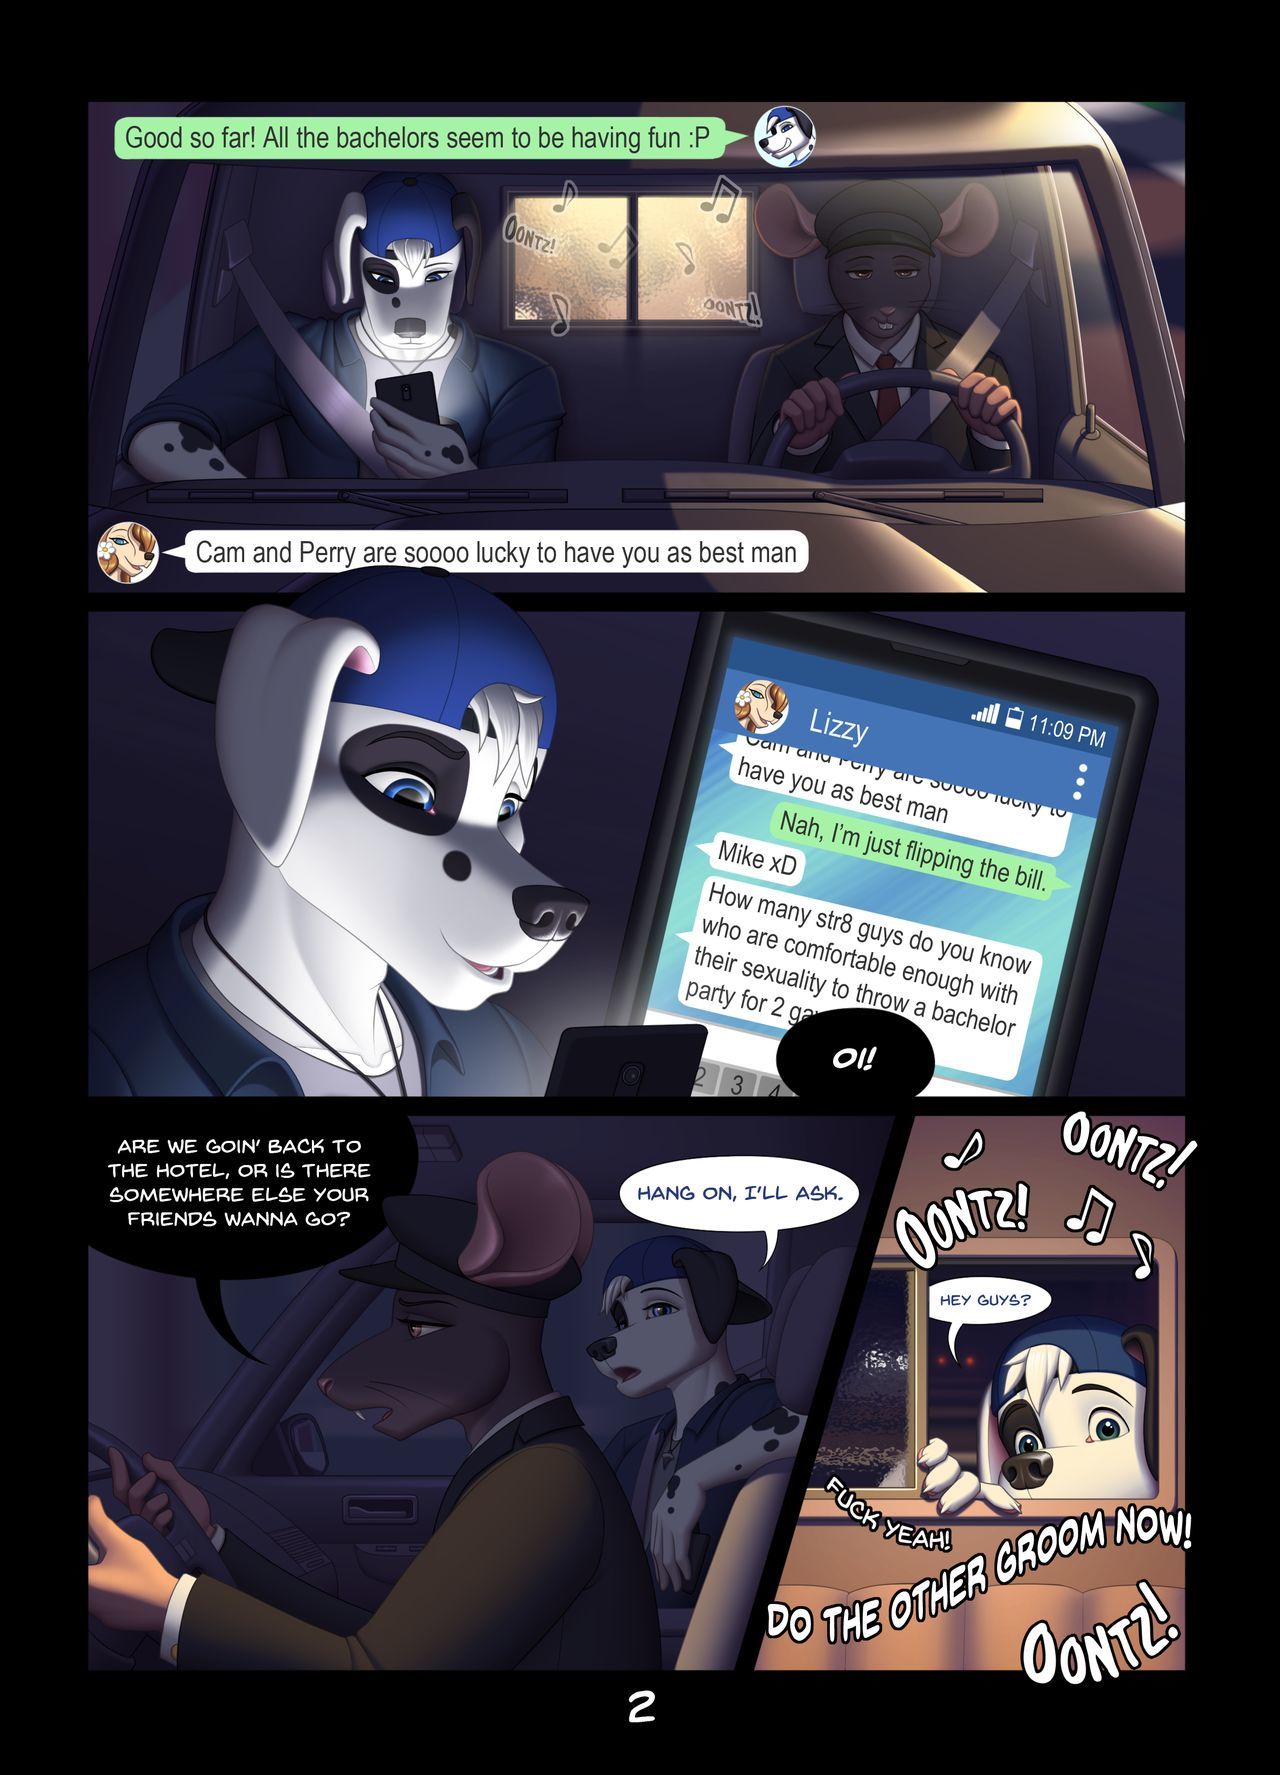 May the Best Man Win - SigmaX page 2